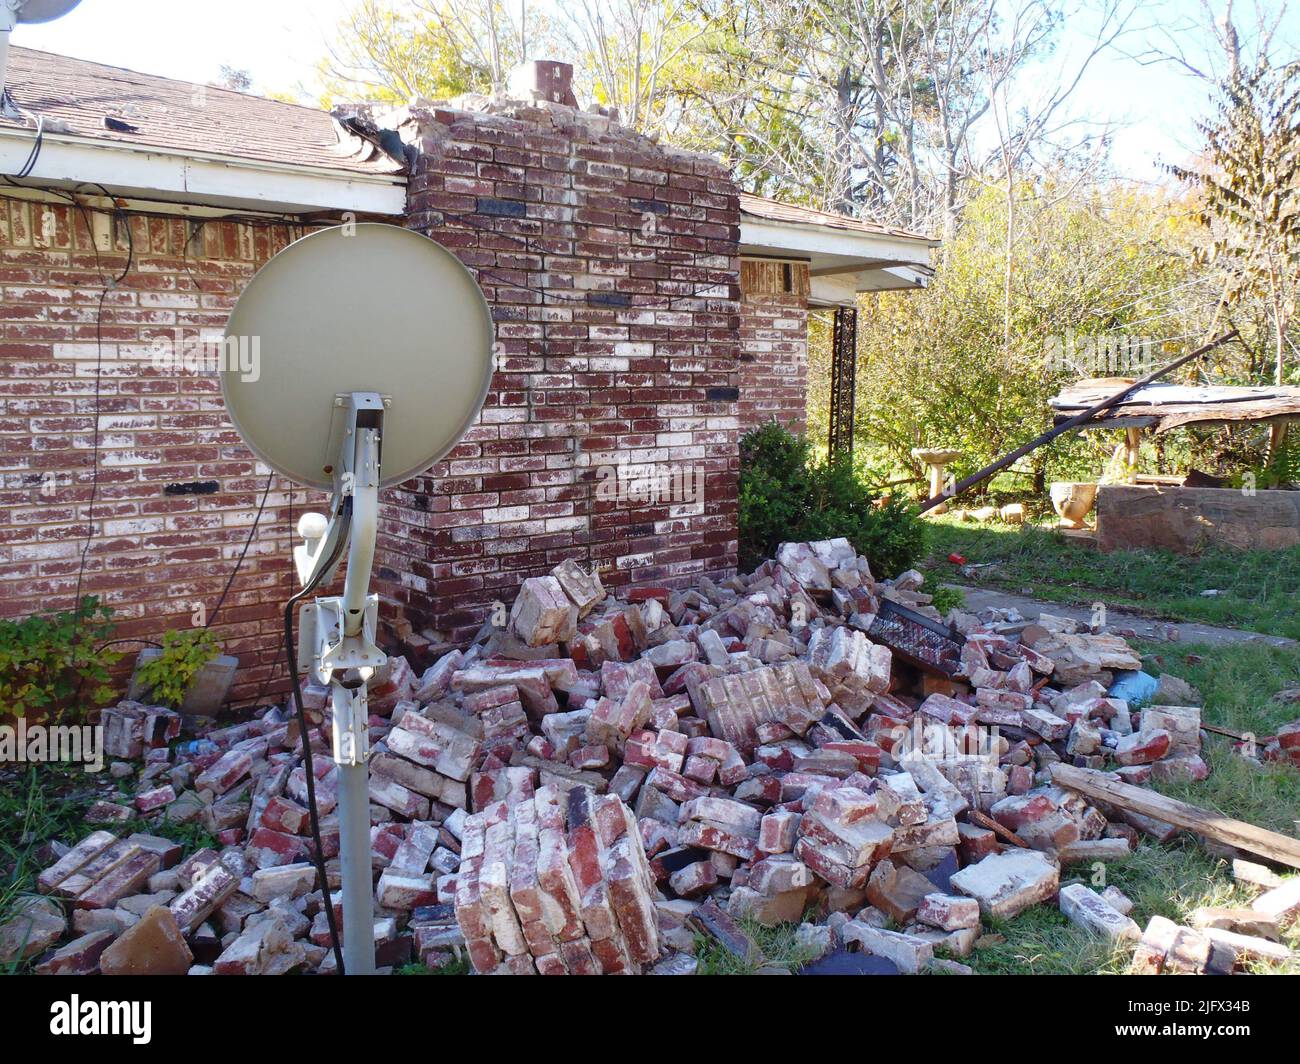 A damage home in central Oklahoma from the magnitude 5.6 earthquake on Nov. 6, 2011. Research conducted by USGS geophysicist Elizabeth Cochran and her university-based colleagues suggests that this earthquake was induced by injection into deep disposal wells in the Wilzetta North field. Photo credit: Brian Sherrod, USGS. Stock Photo